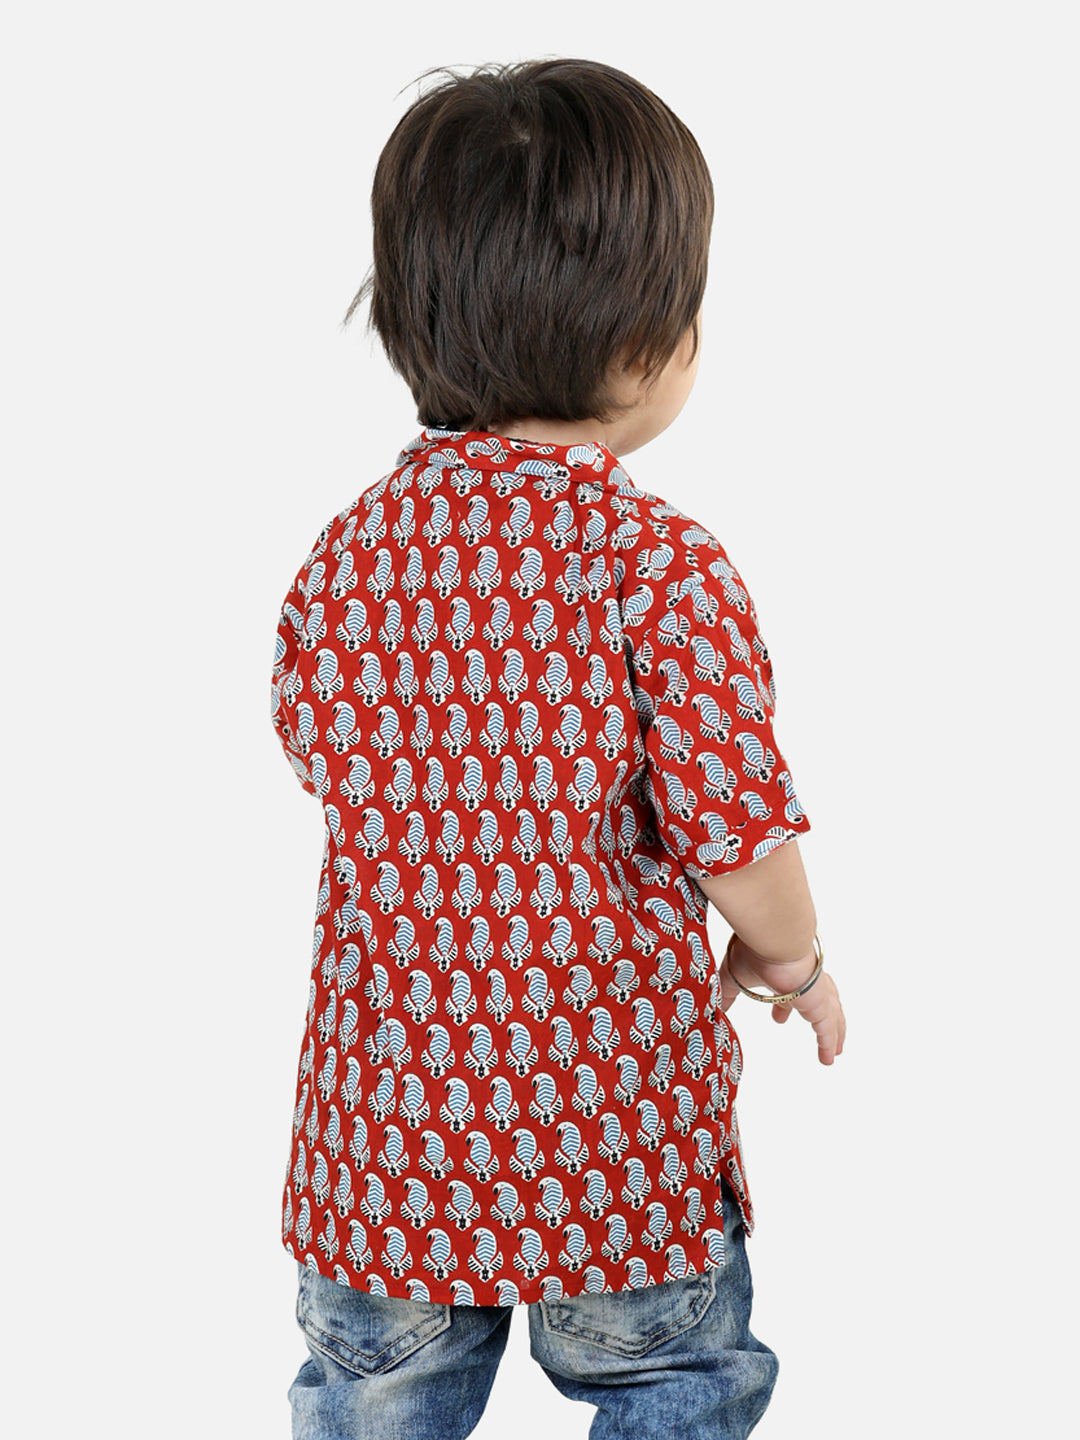 Boy's Red Cotton Shirts - Bownbee